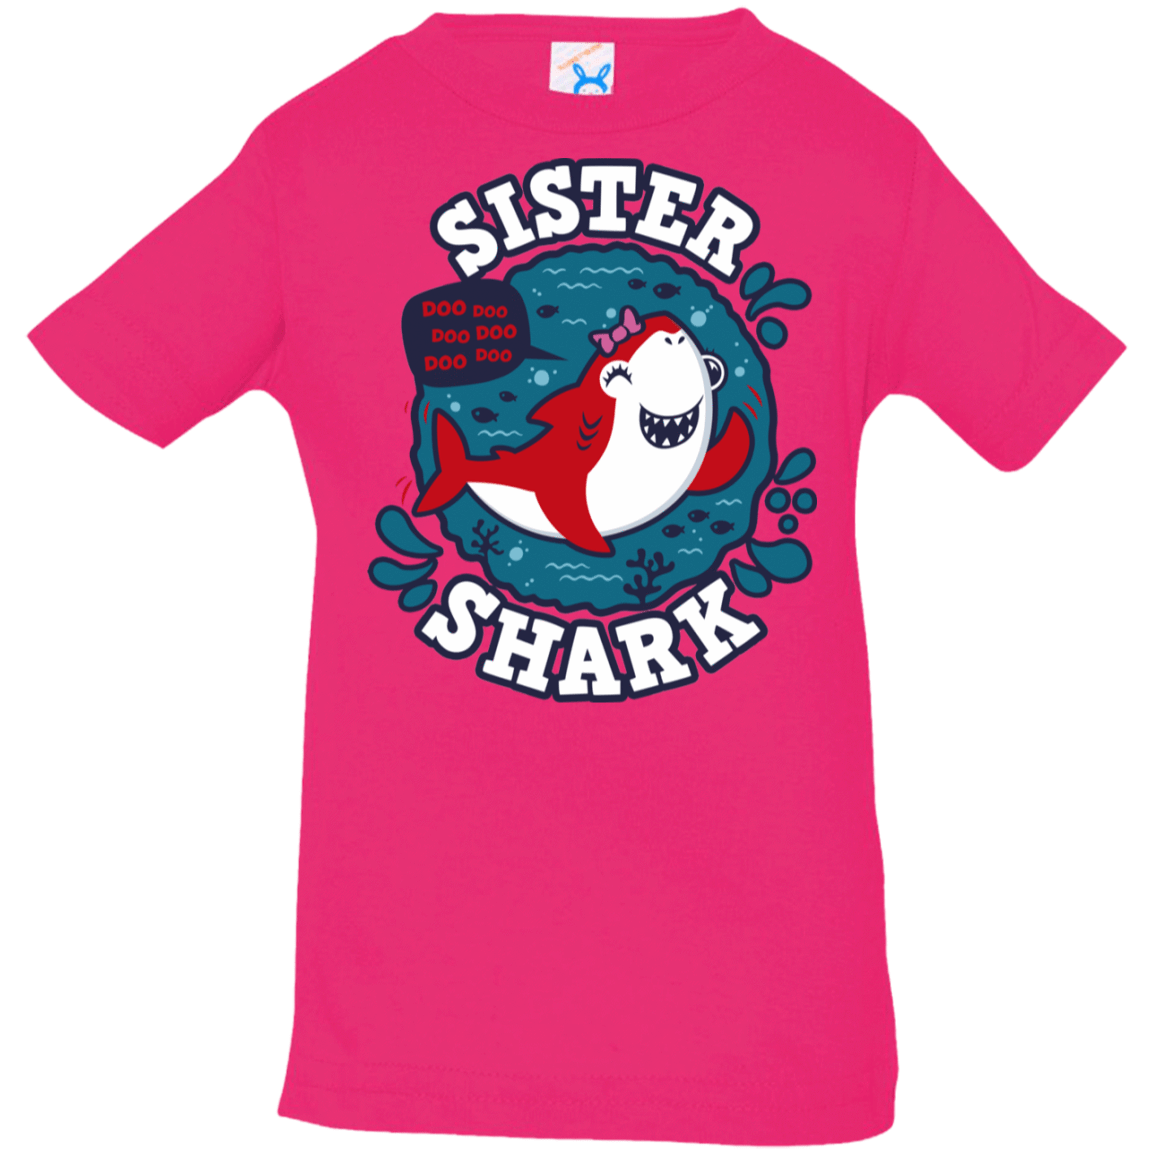 T-Shirts Hot Pink / 6 Months Shark Family trazo - Sister Infant Premium T-Shirt